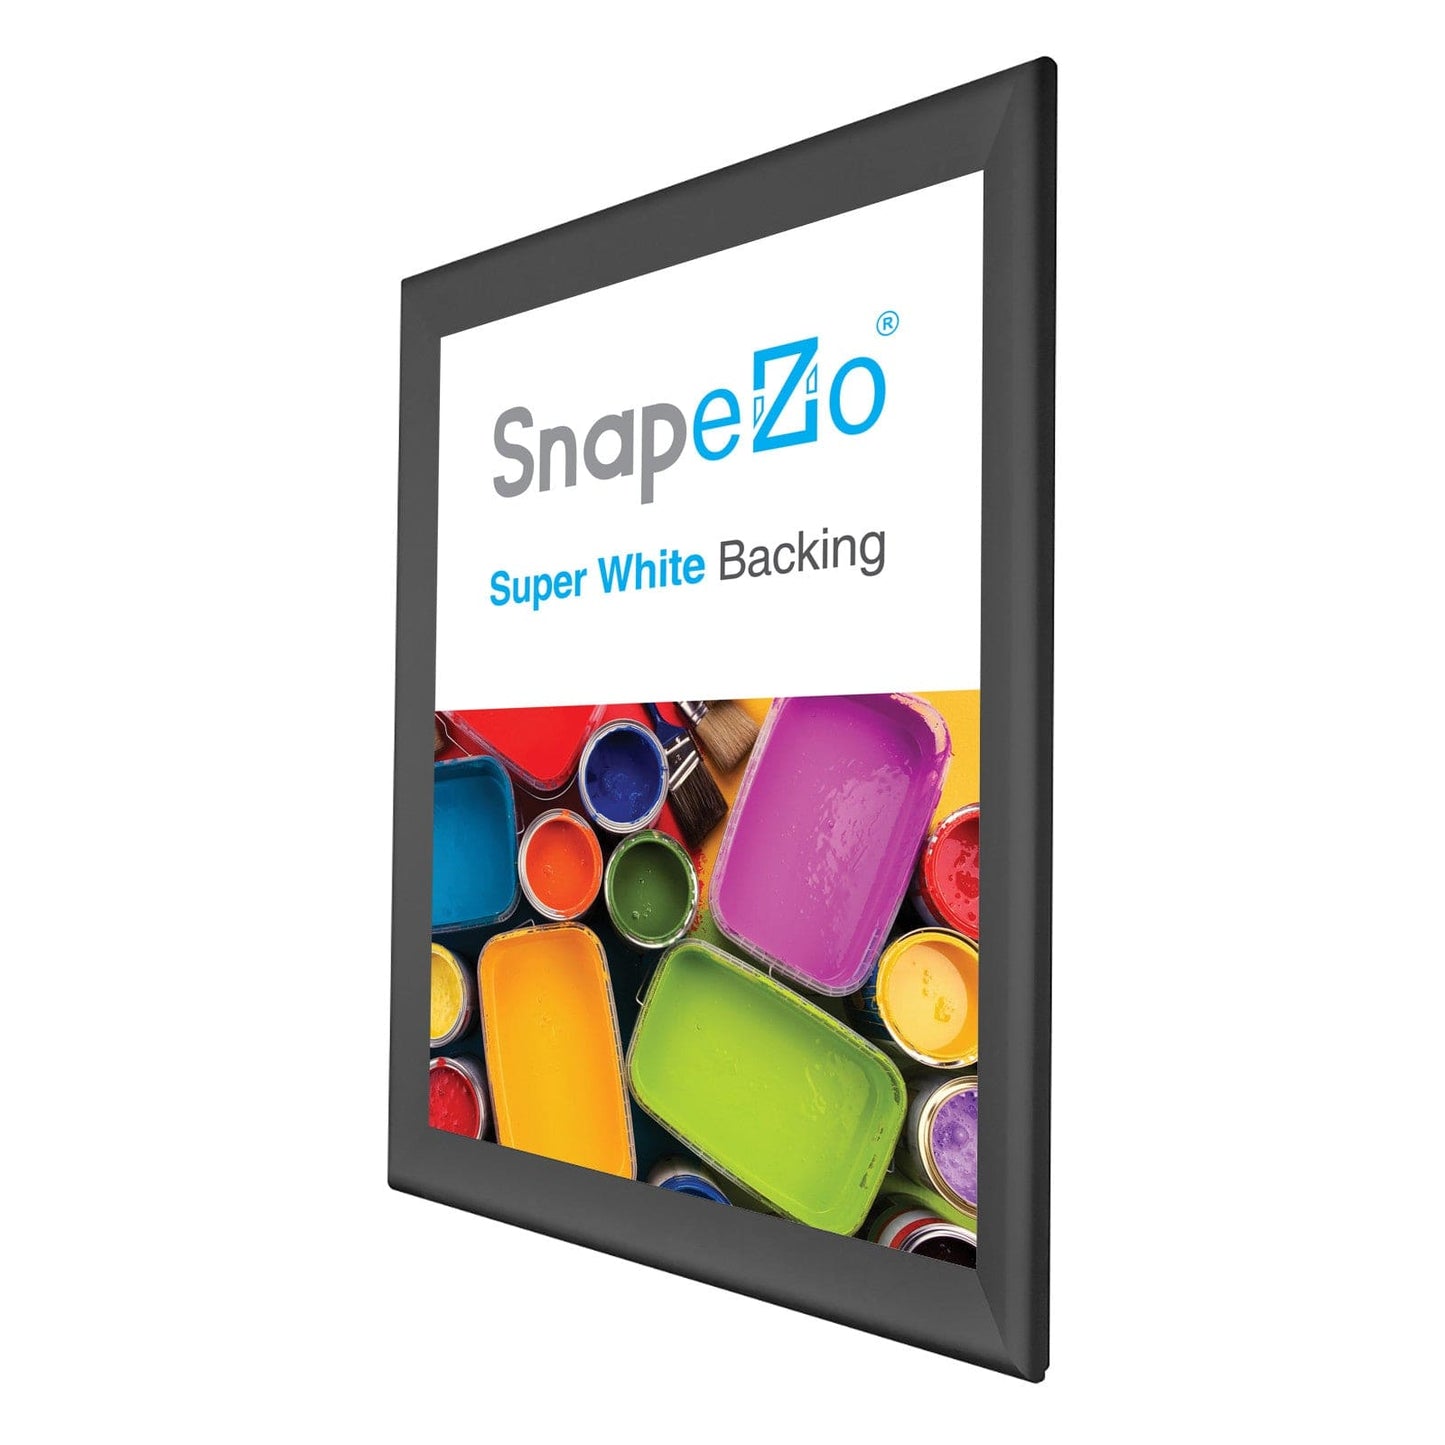 34x48 Inches Black SnapeZo® Snap Frame - 1.7" profile - Snap Frames Direct